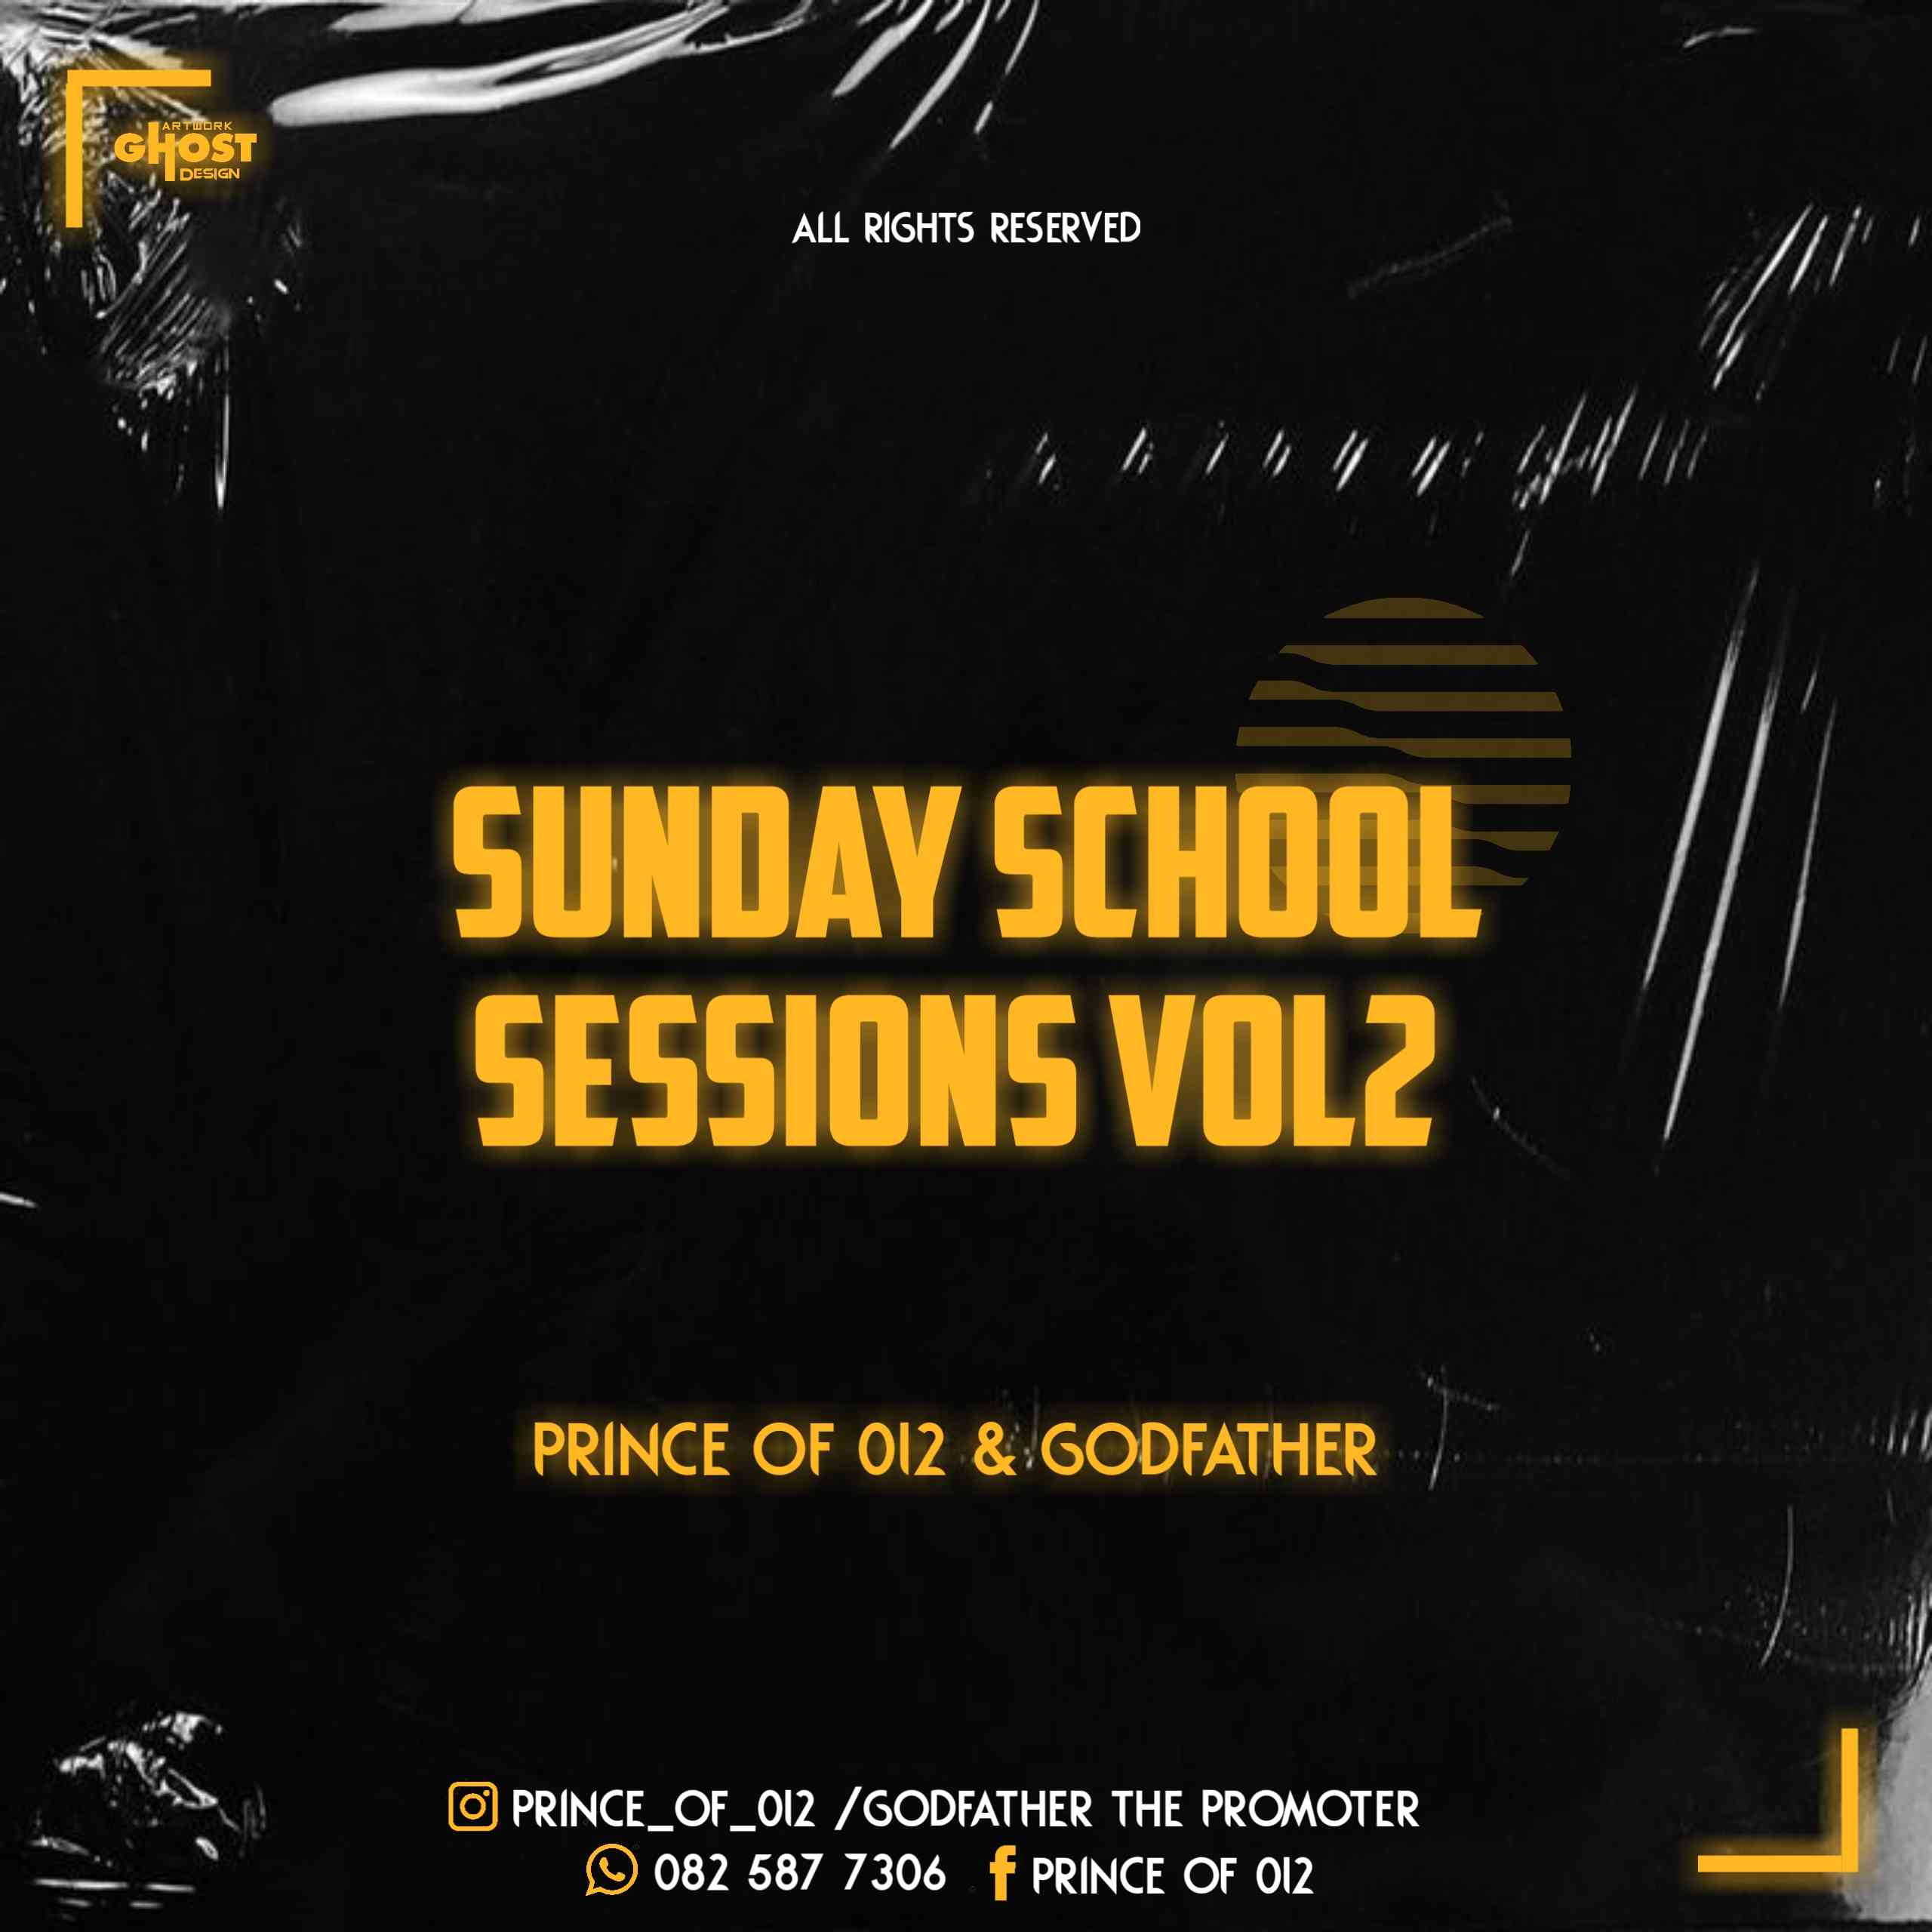 Prince of 012 n Godfather Sunday School Sessions Vol. 2